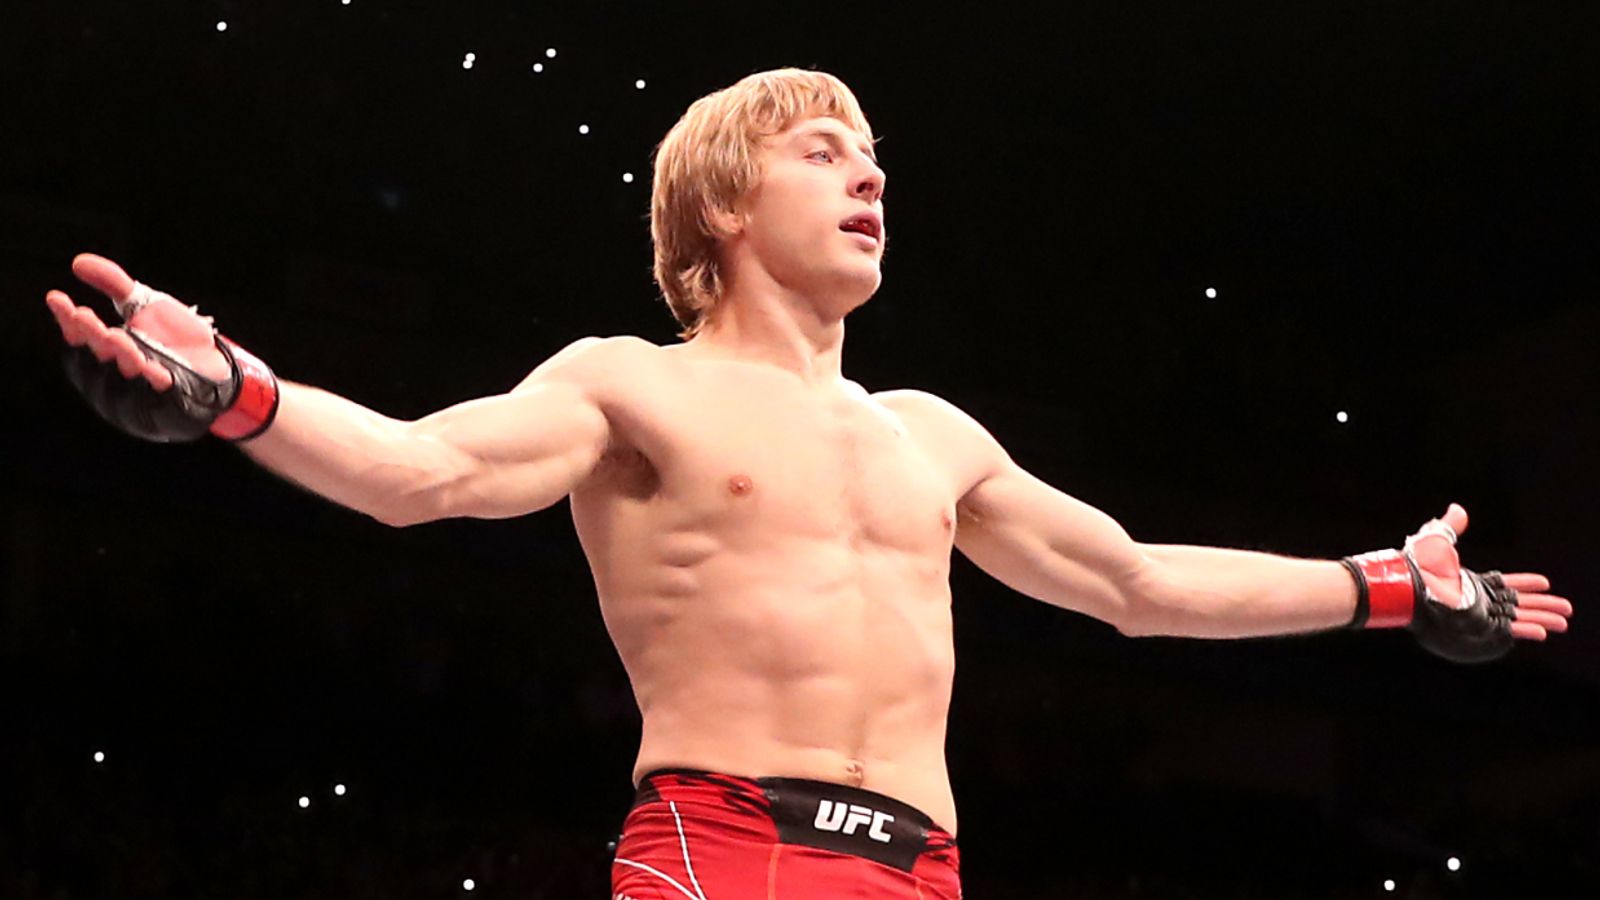 paddy-pimblett-vows-to-be-ufc-s-biggest-draw-i-was-put-on-this-earth-to-beat-people-up-and-entertain-while-i-do-it